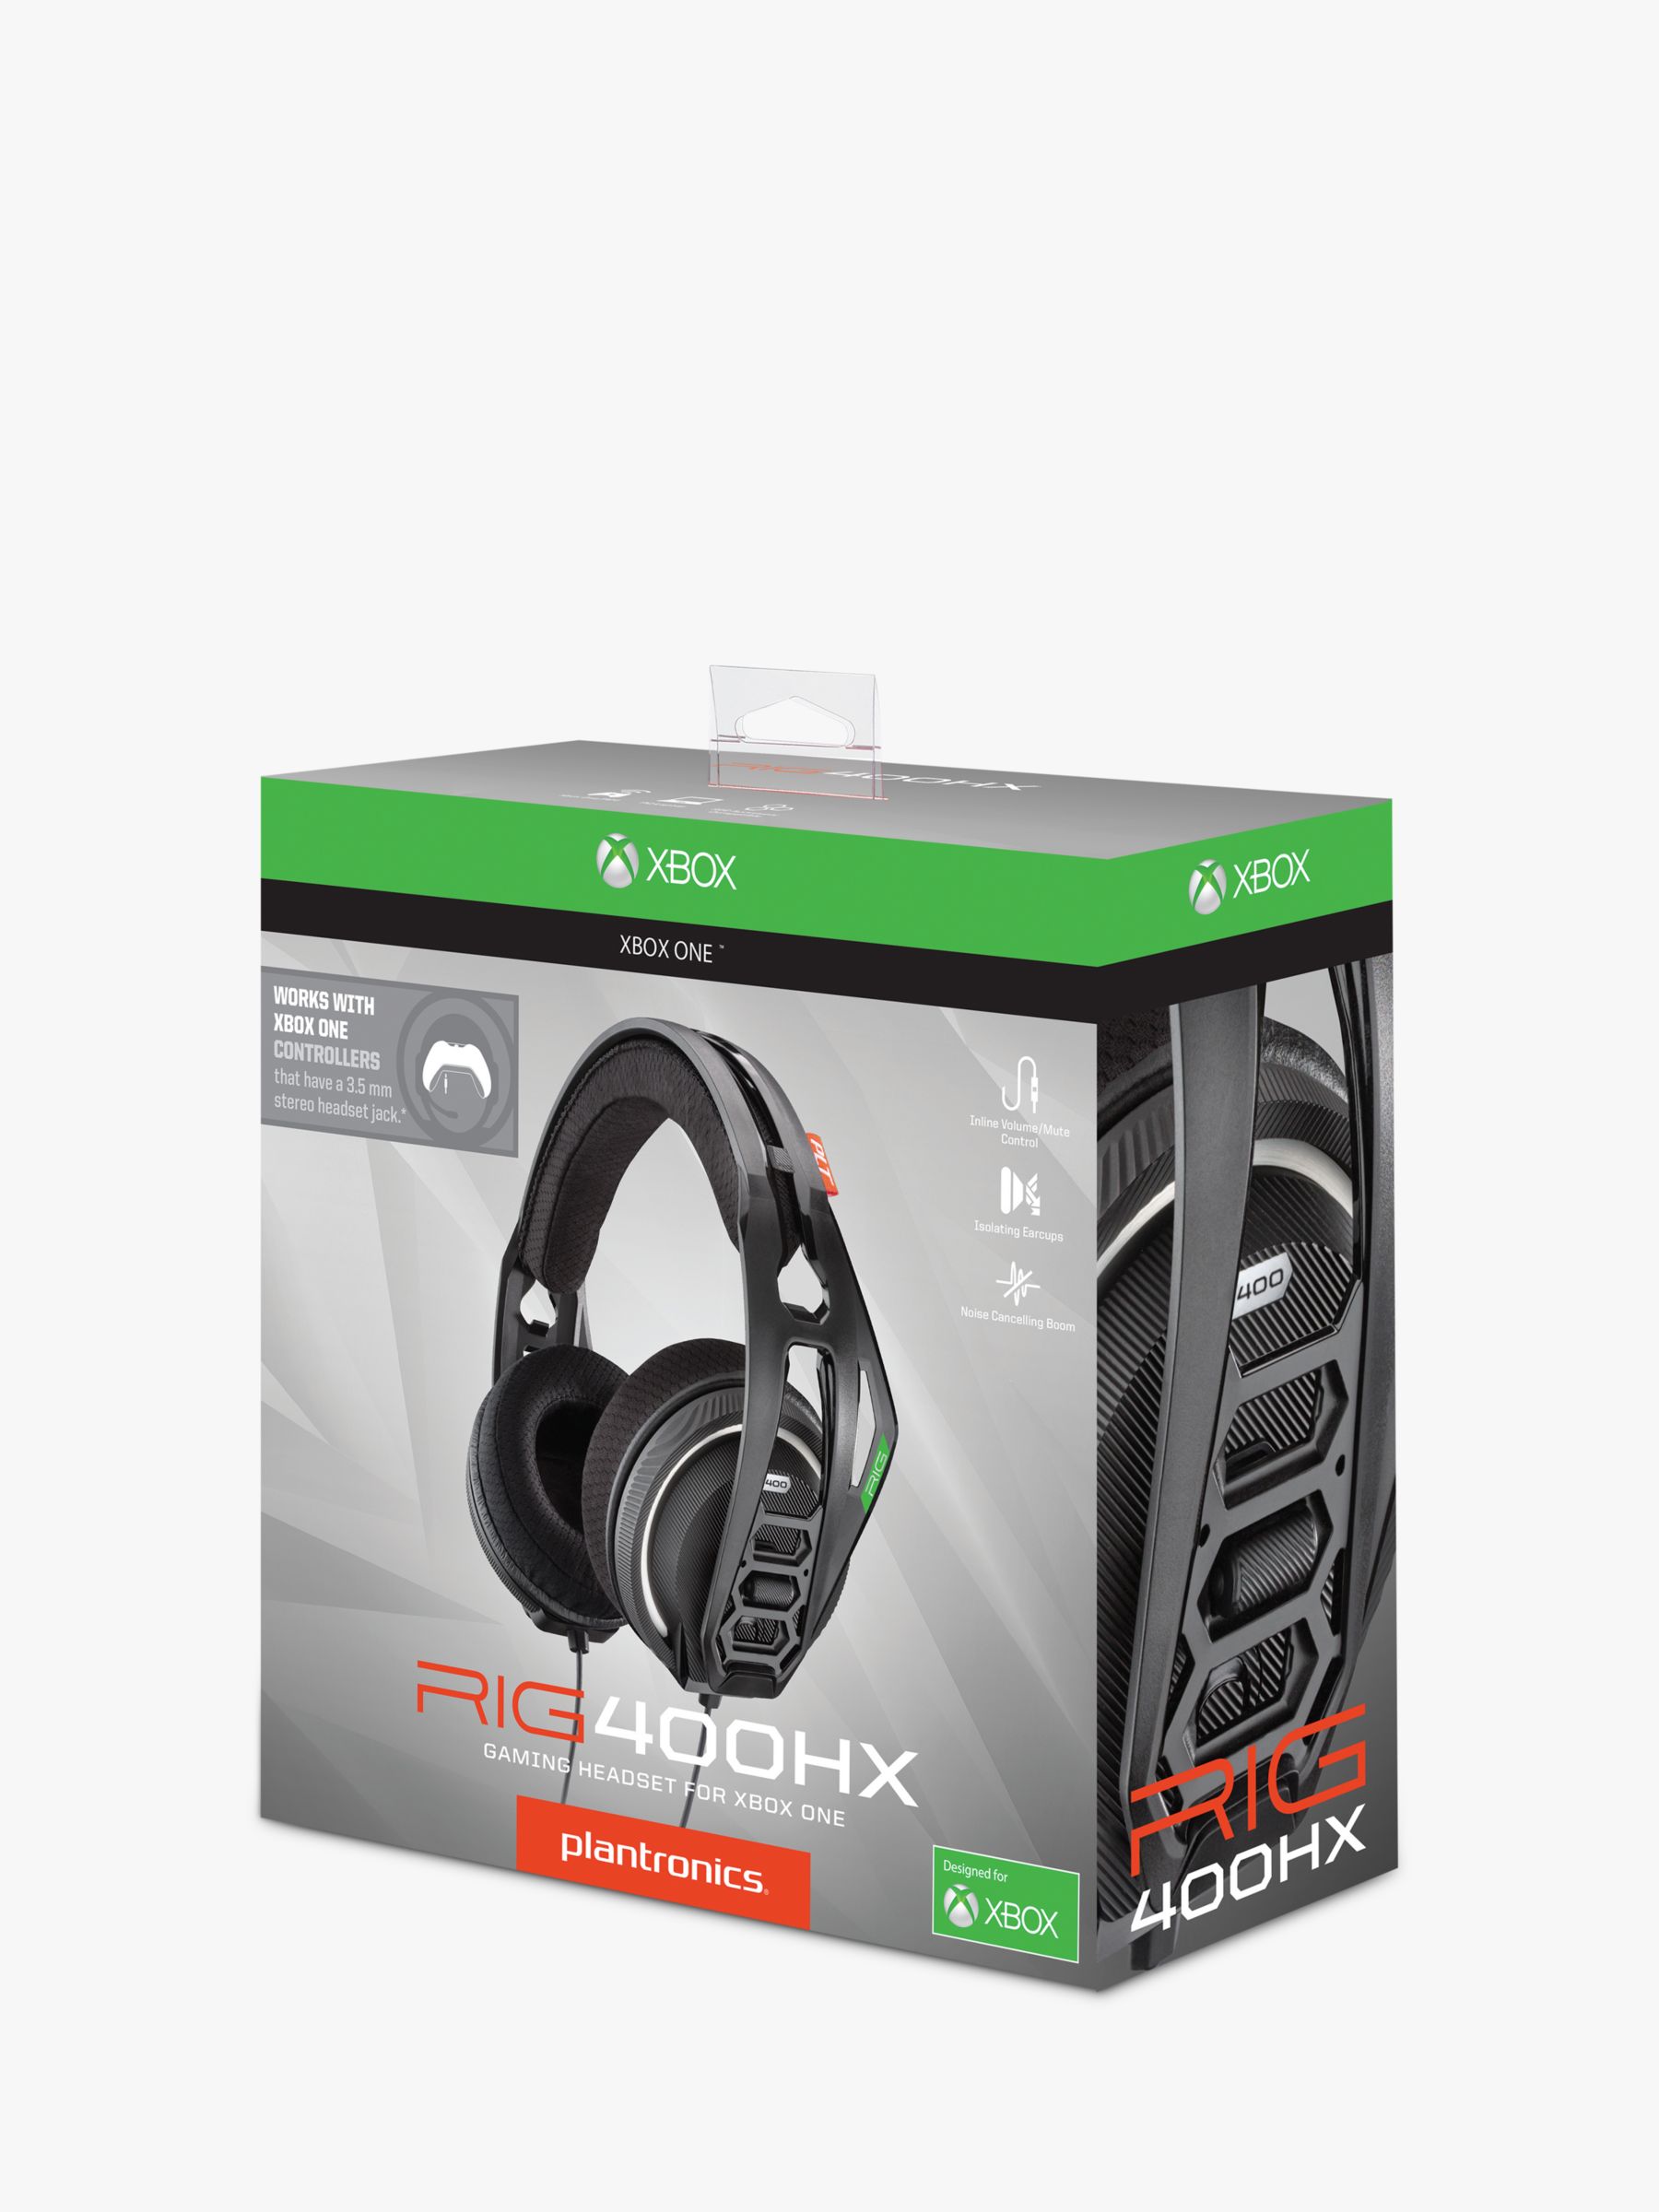 dolby atmos for headphones xbox